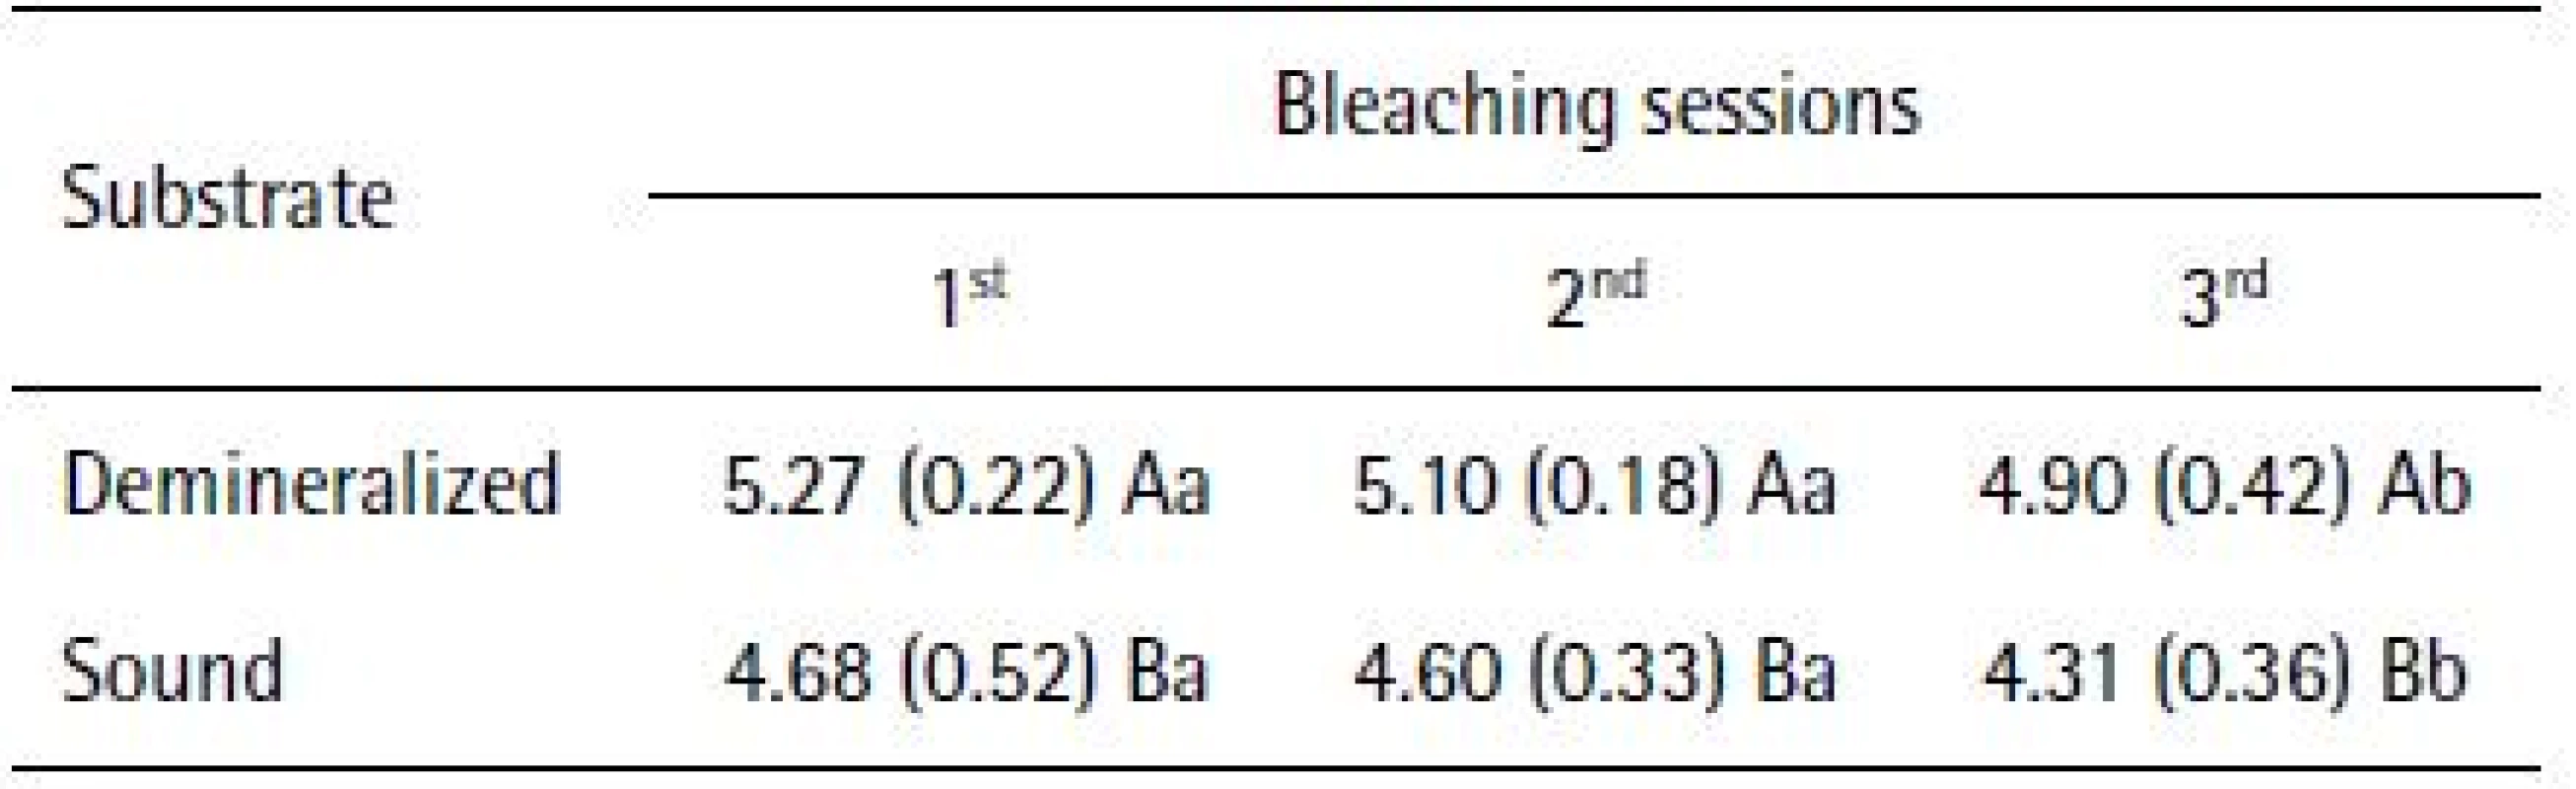 Mean (SD) peroxide concentrations (μg/mL) recovered from artificial pulp chambers after tooth whitening in sound and demineralized enamel, according to the bleaching sessions